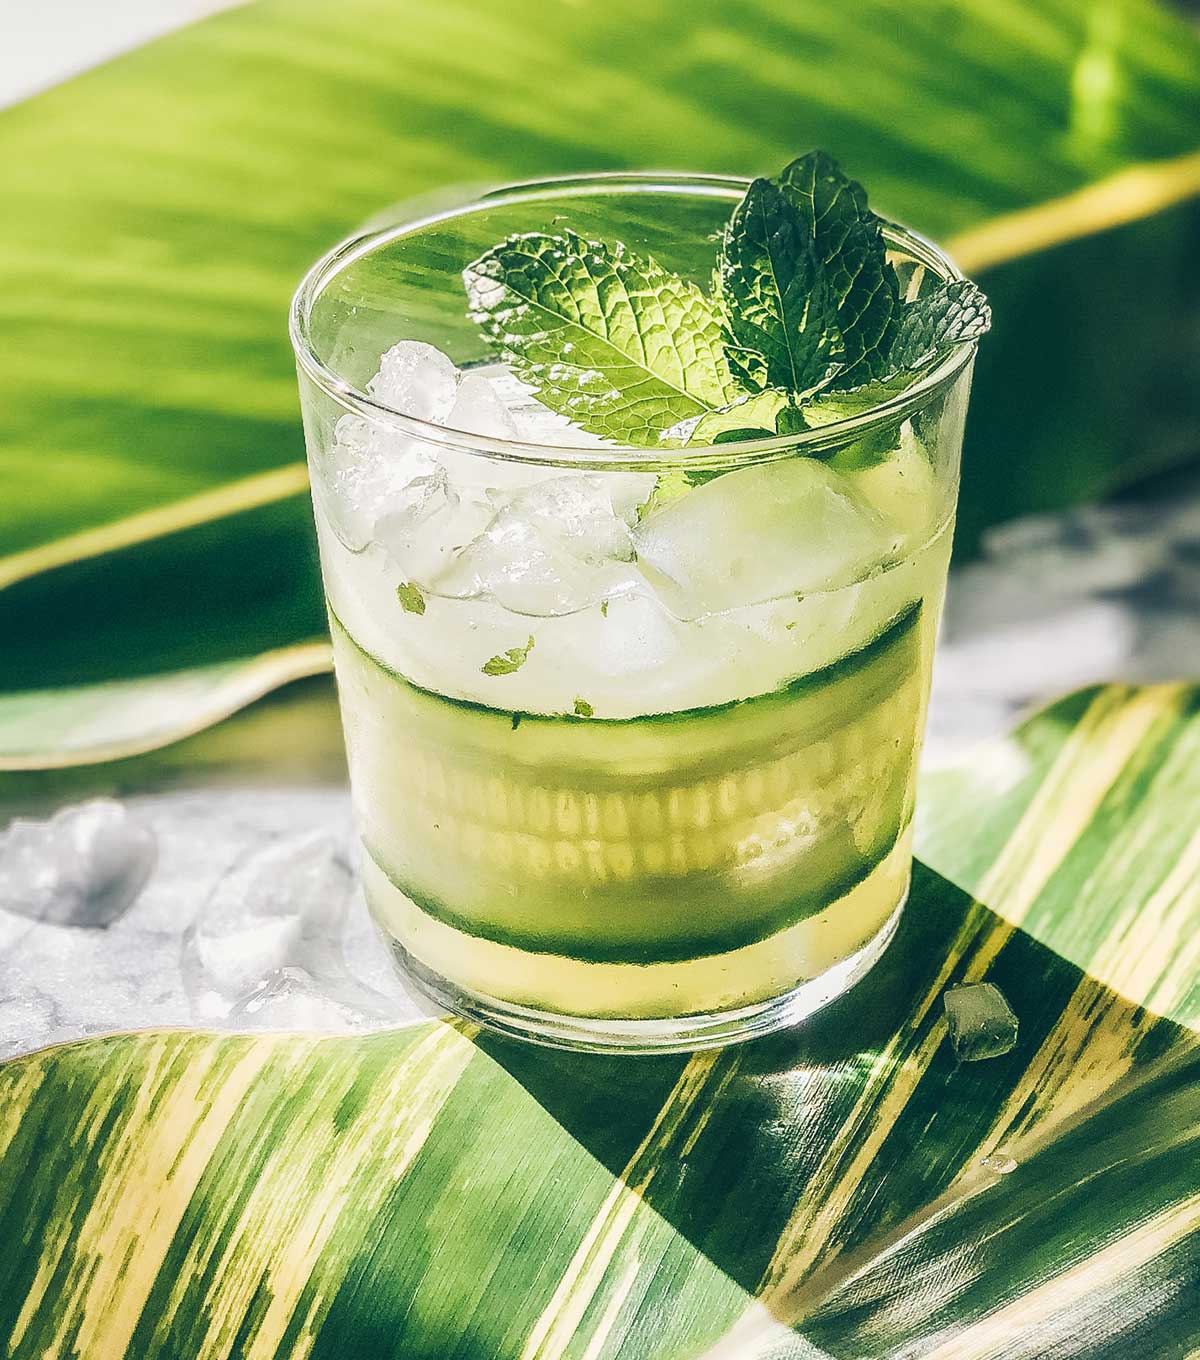 A drink glass filled with a Cucumber Mint Gimlet, ice, a sliver of cucumber, and a sprig of mint.